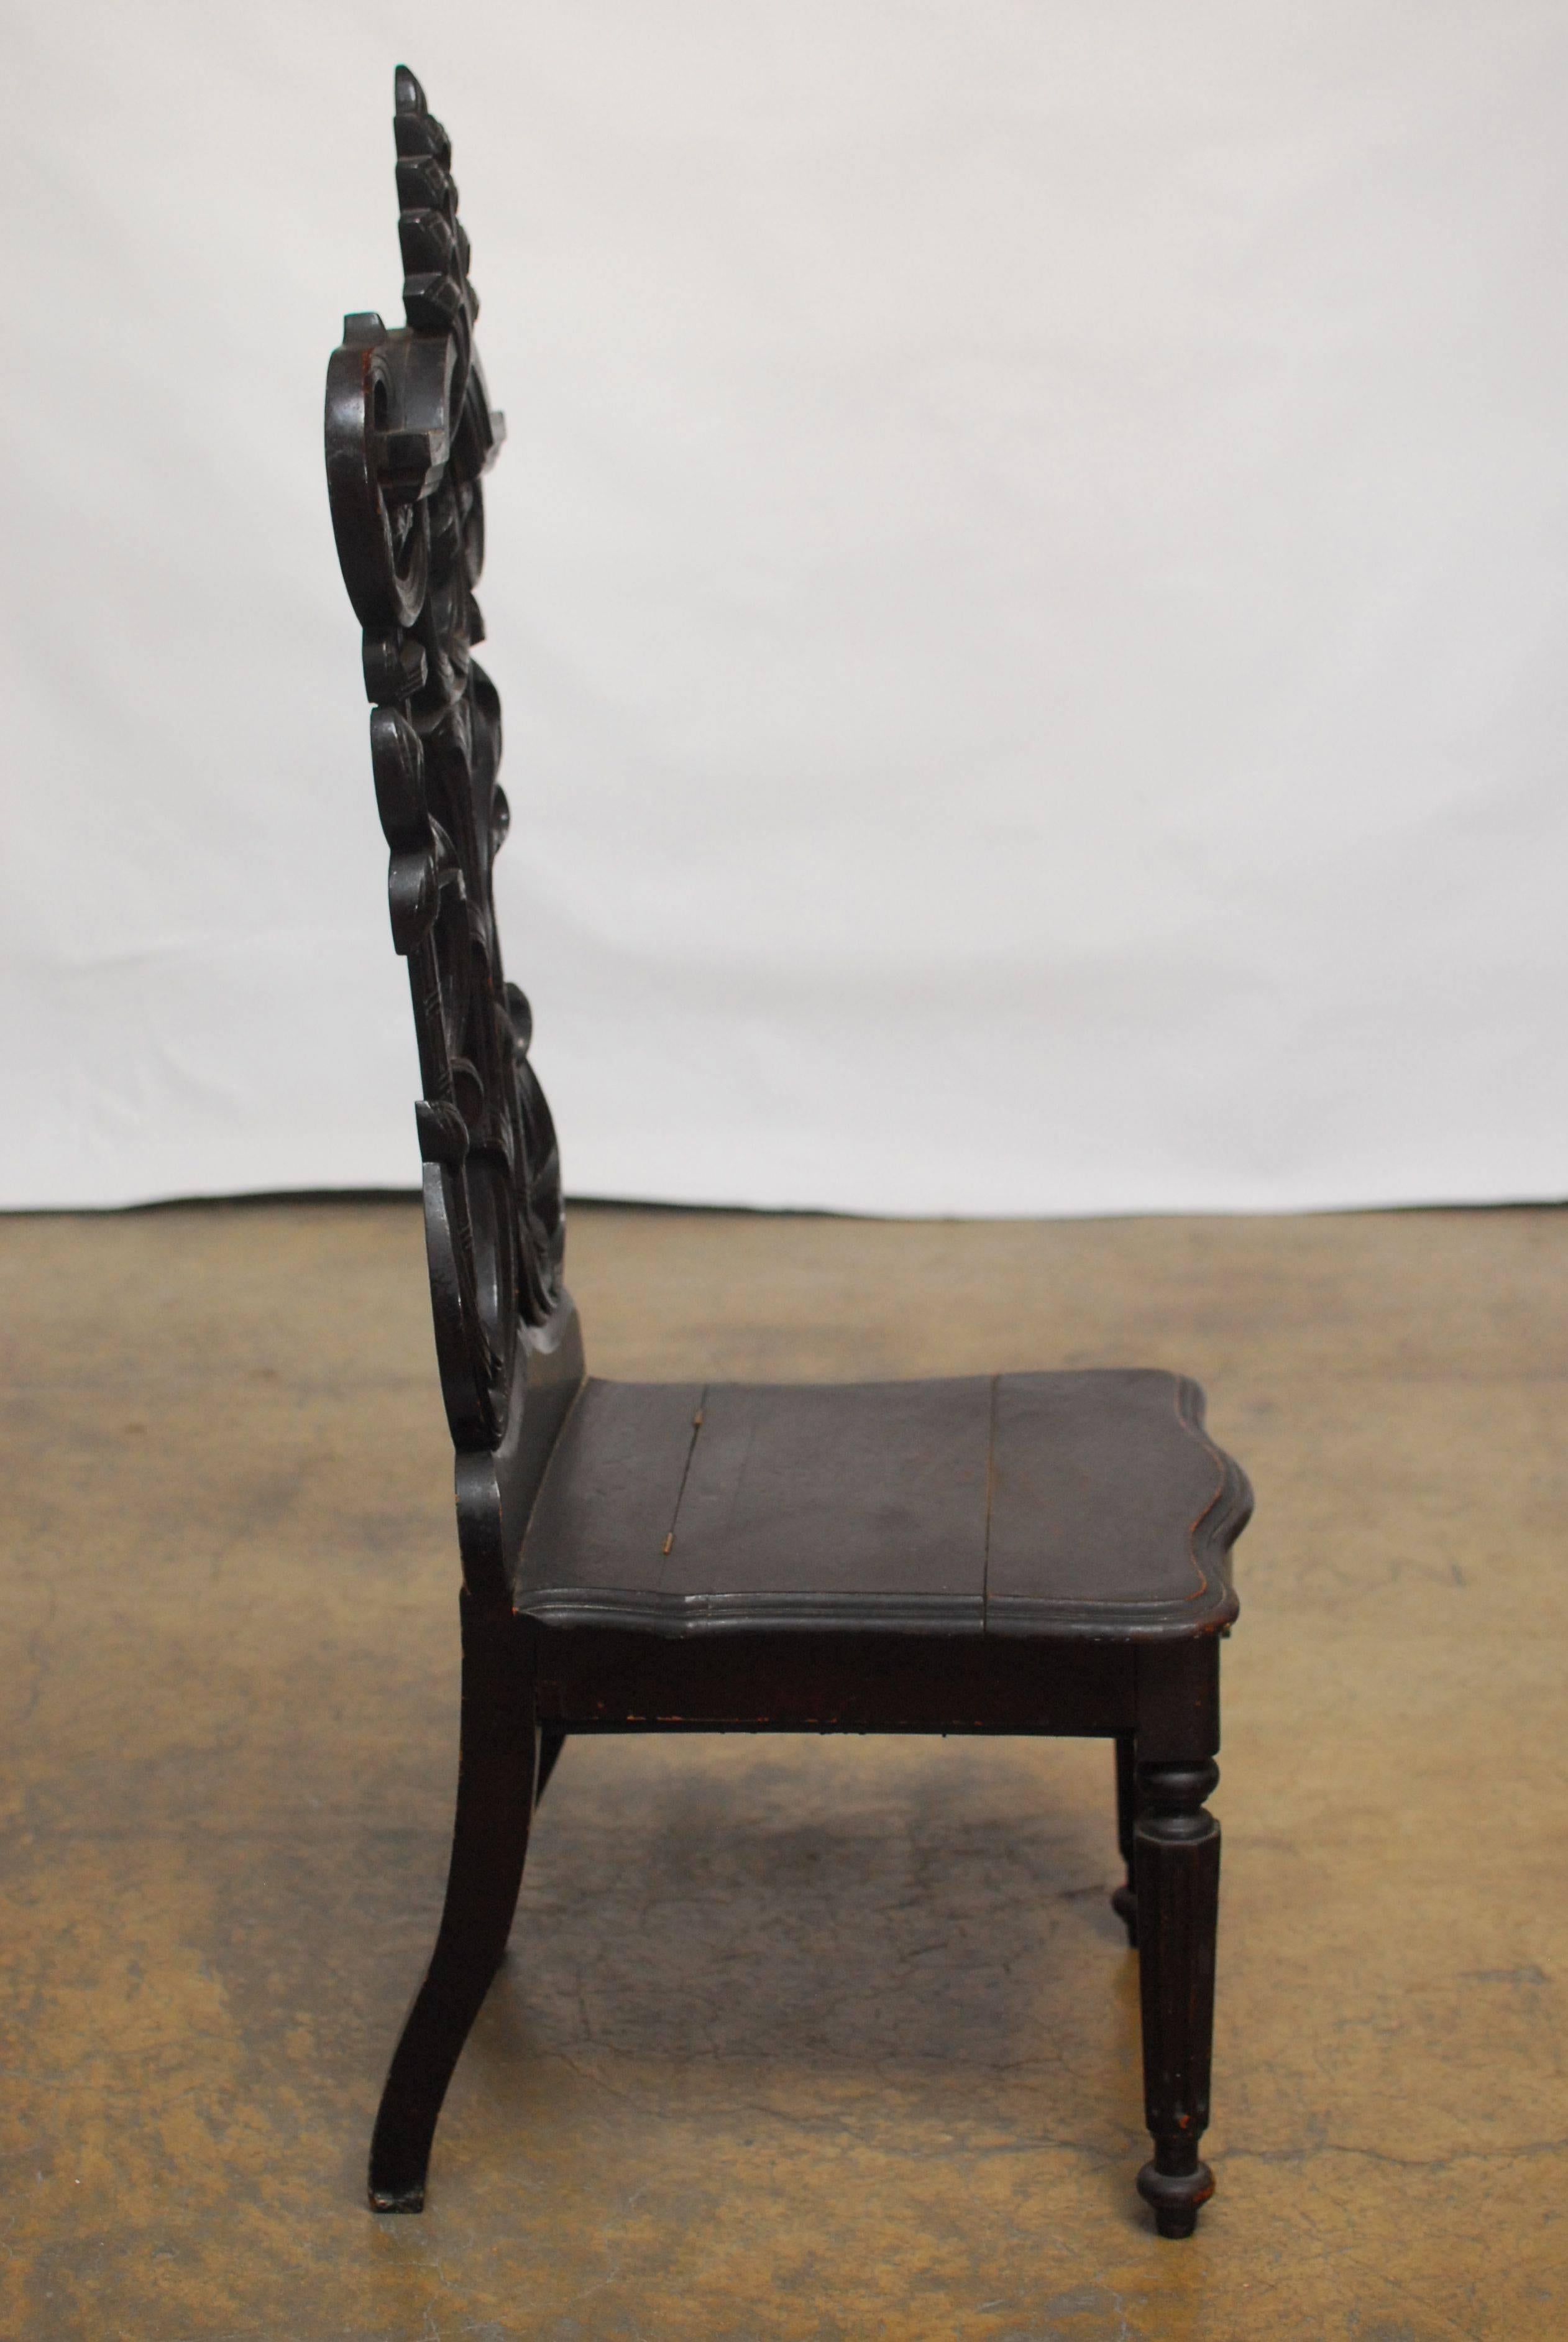 German hall chair made in the Rococo style with an ebonized finish. Elaborately carved pillared back with decorative "s" scrolls and an acanthus finial crest. The plank seat is hinged and opens to a small storage space. The chair sits on